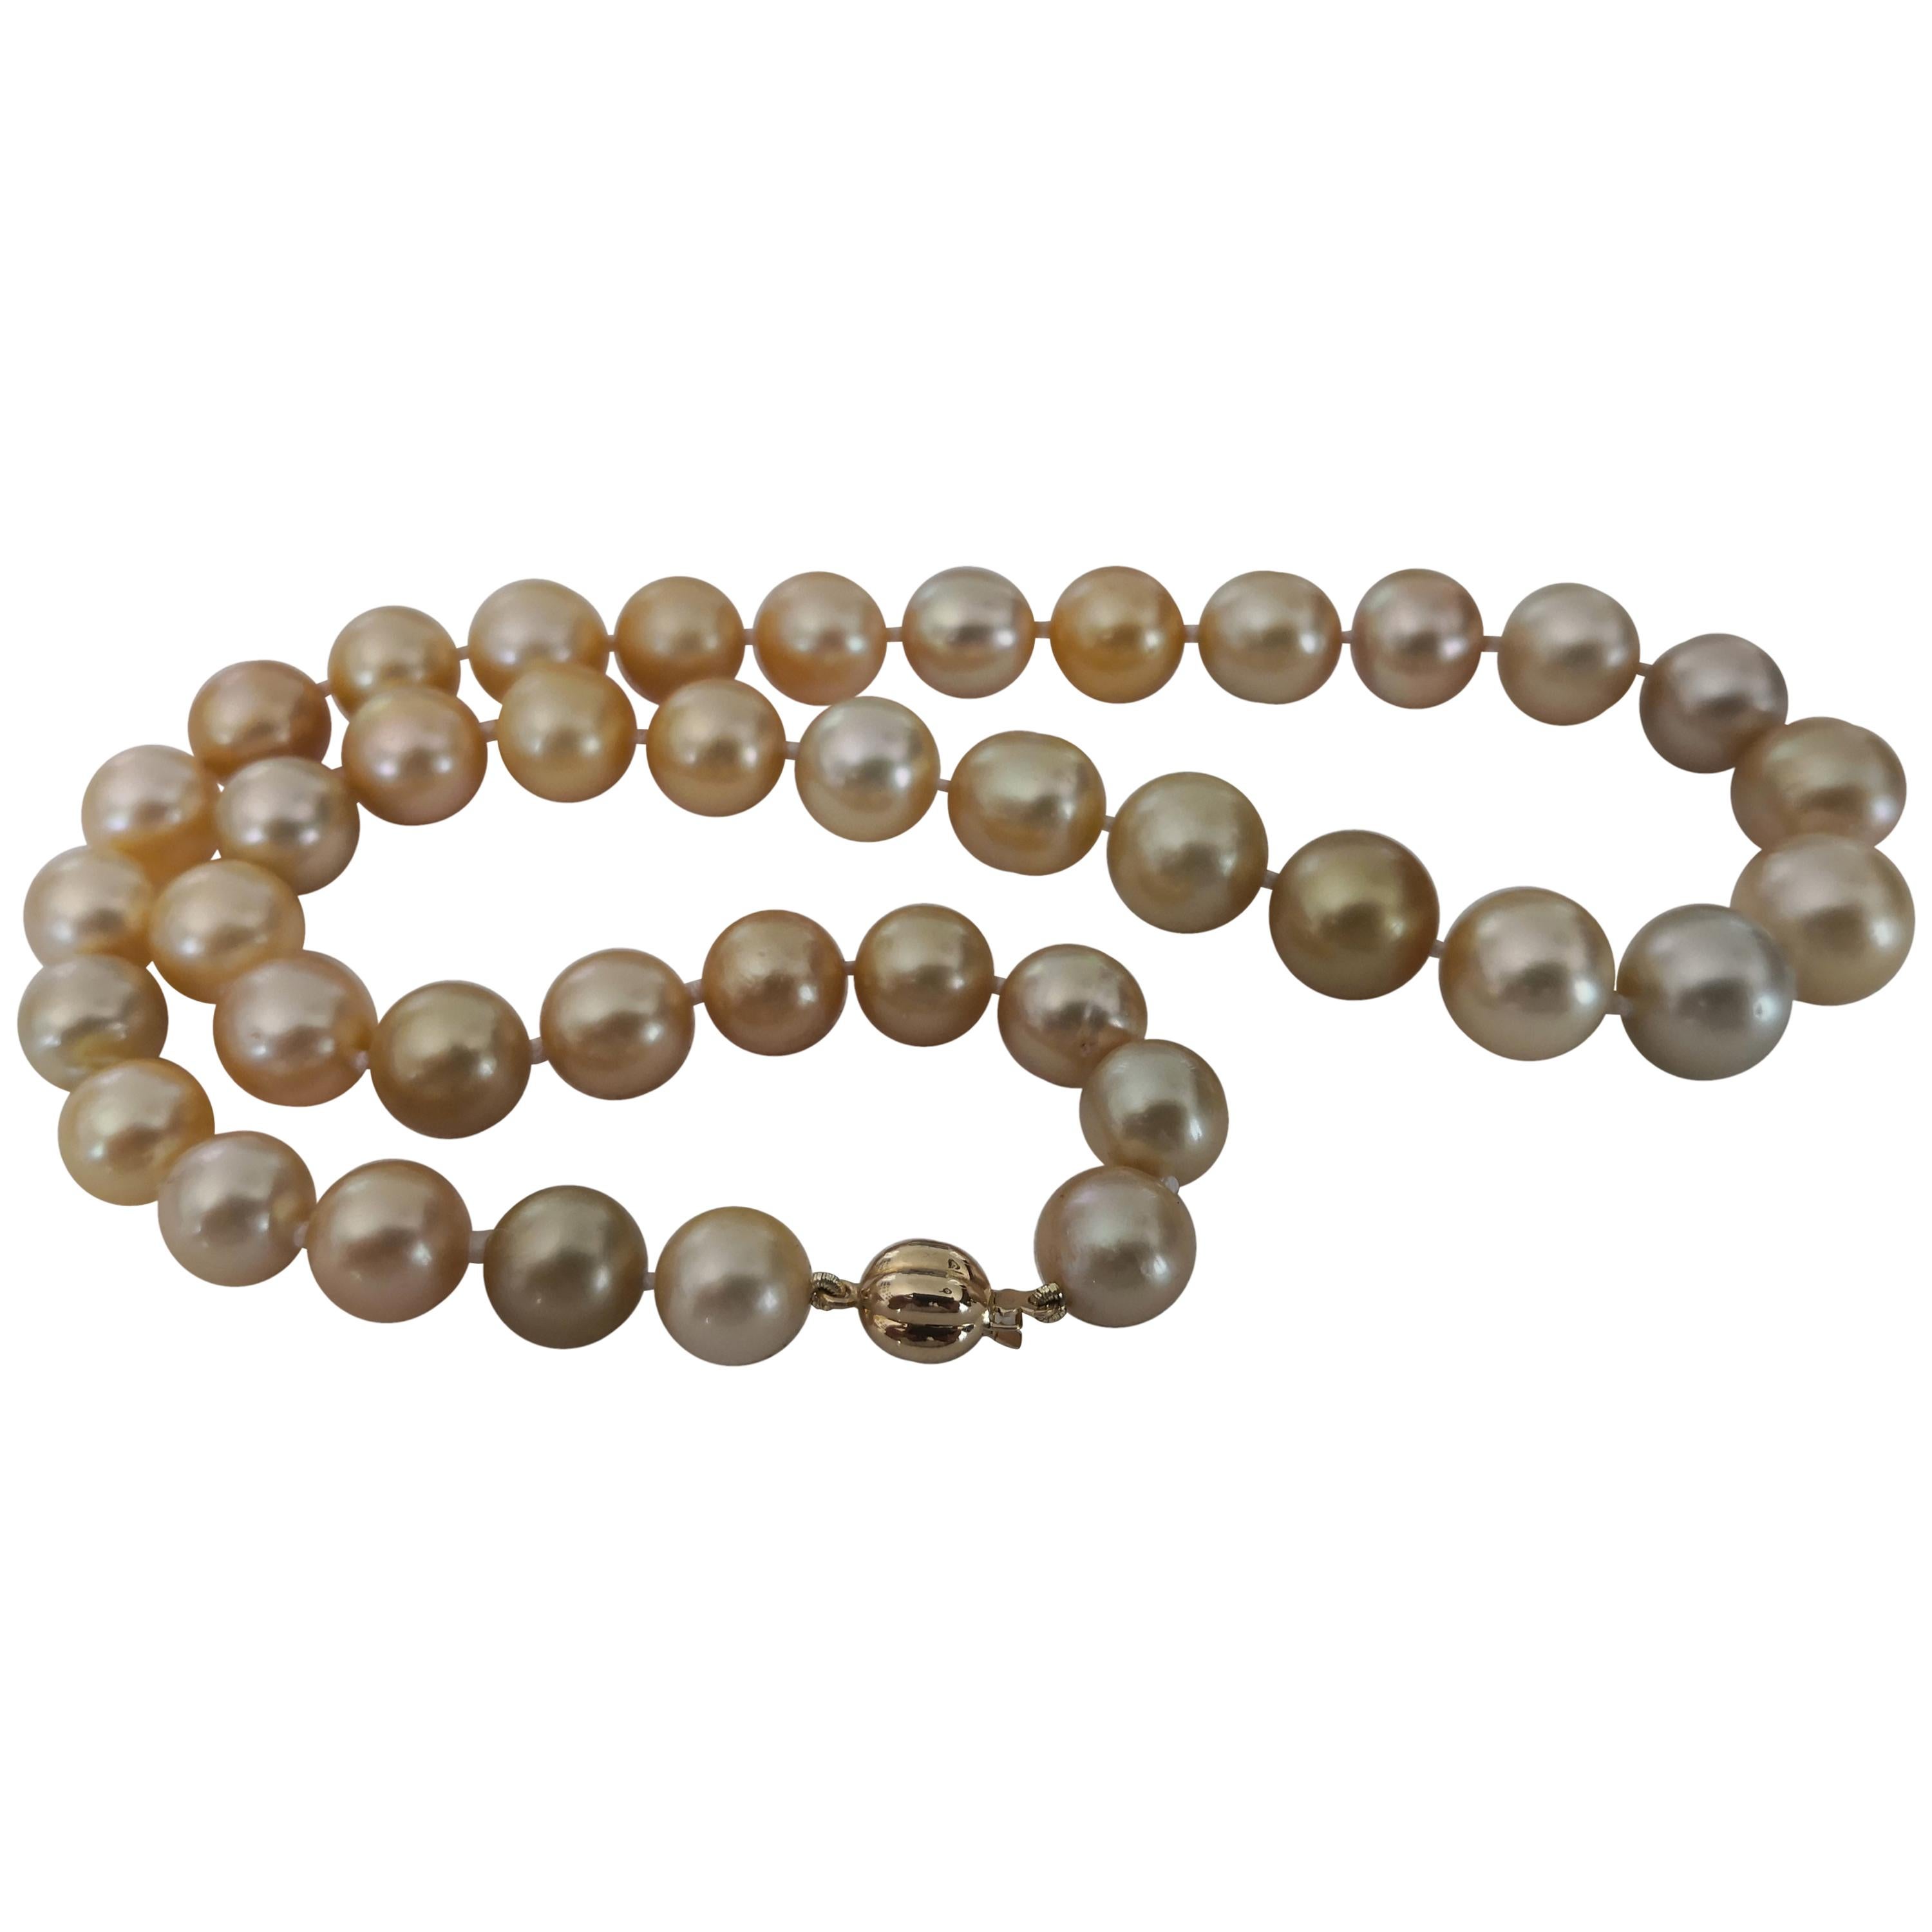 Deep Golden South Sea Pearls Natural Color and Luster, 18 Karat Gold For Sale